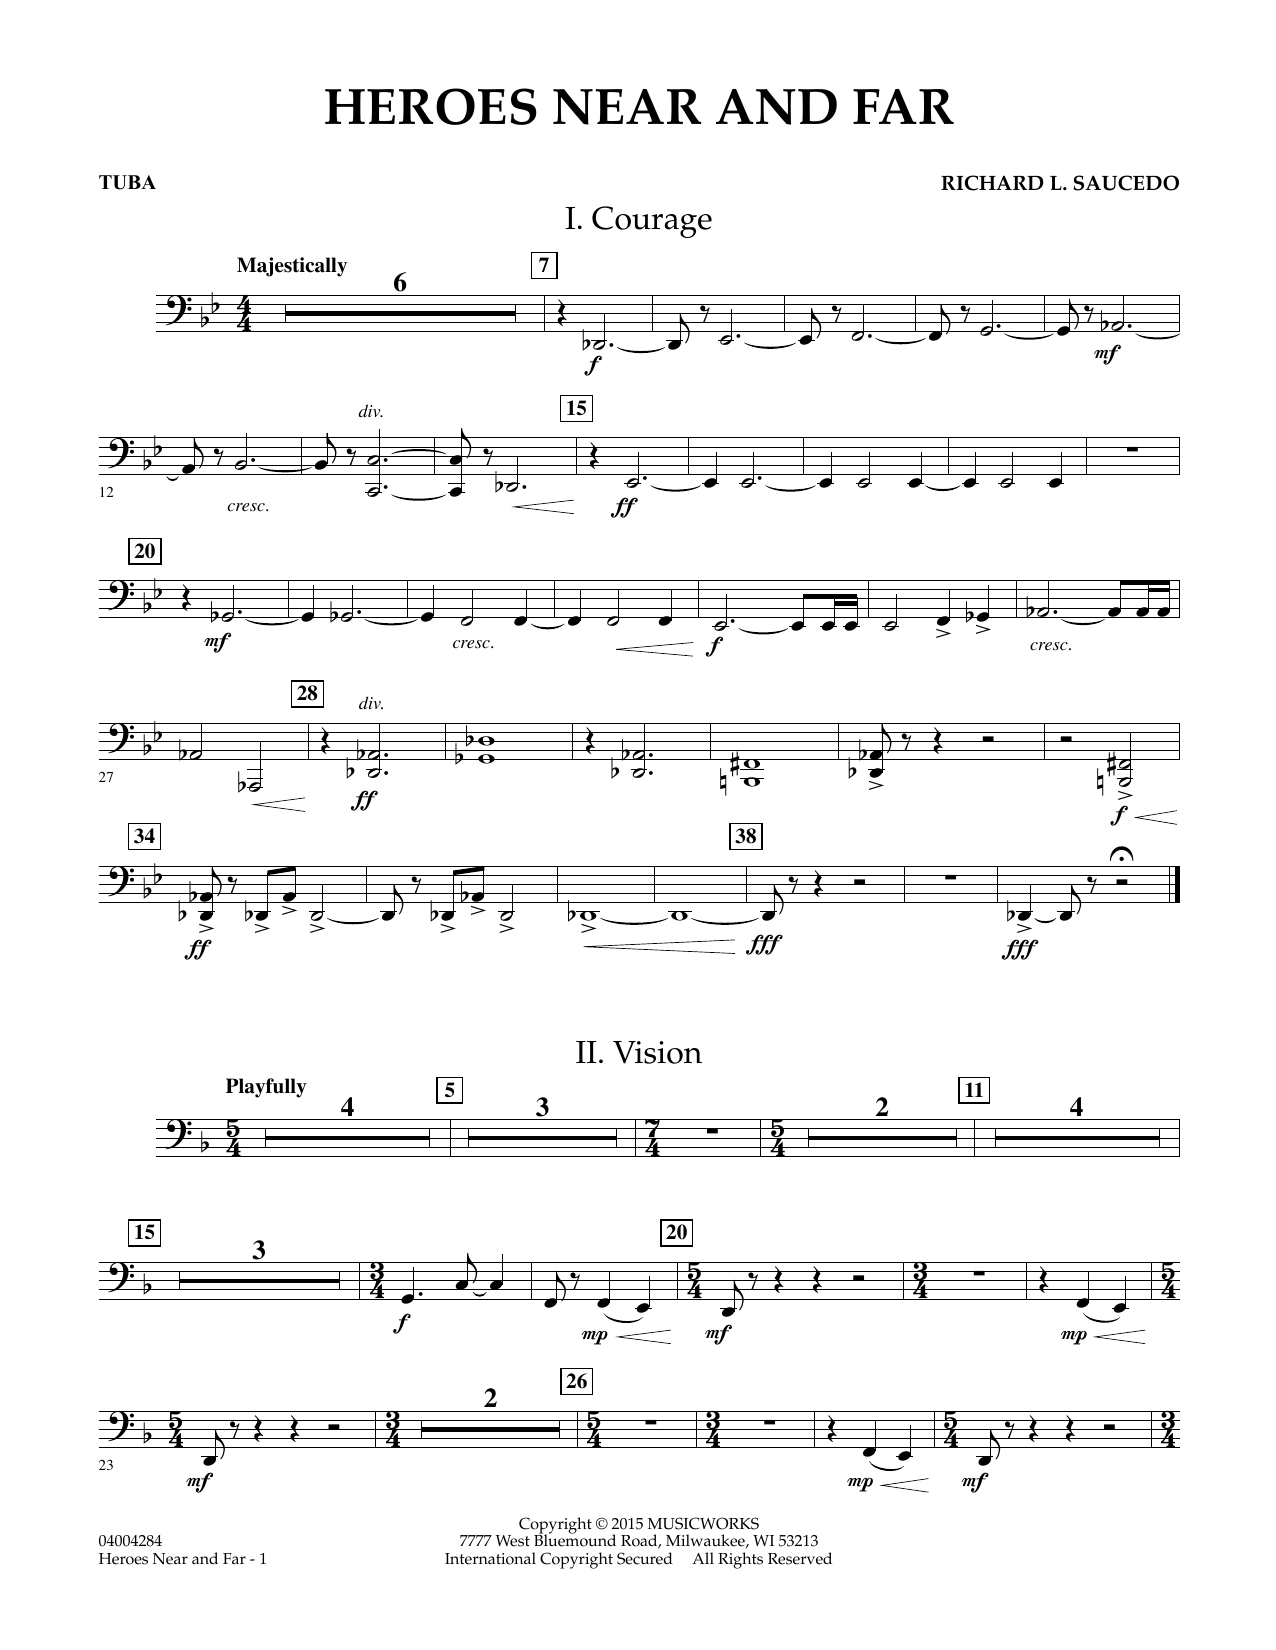 Richard L. Saucedo Heroes Near and Far - Tuba sheet music notes and chords. Download Printable PDF.